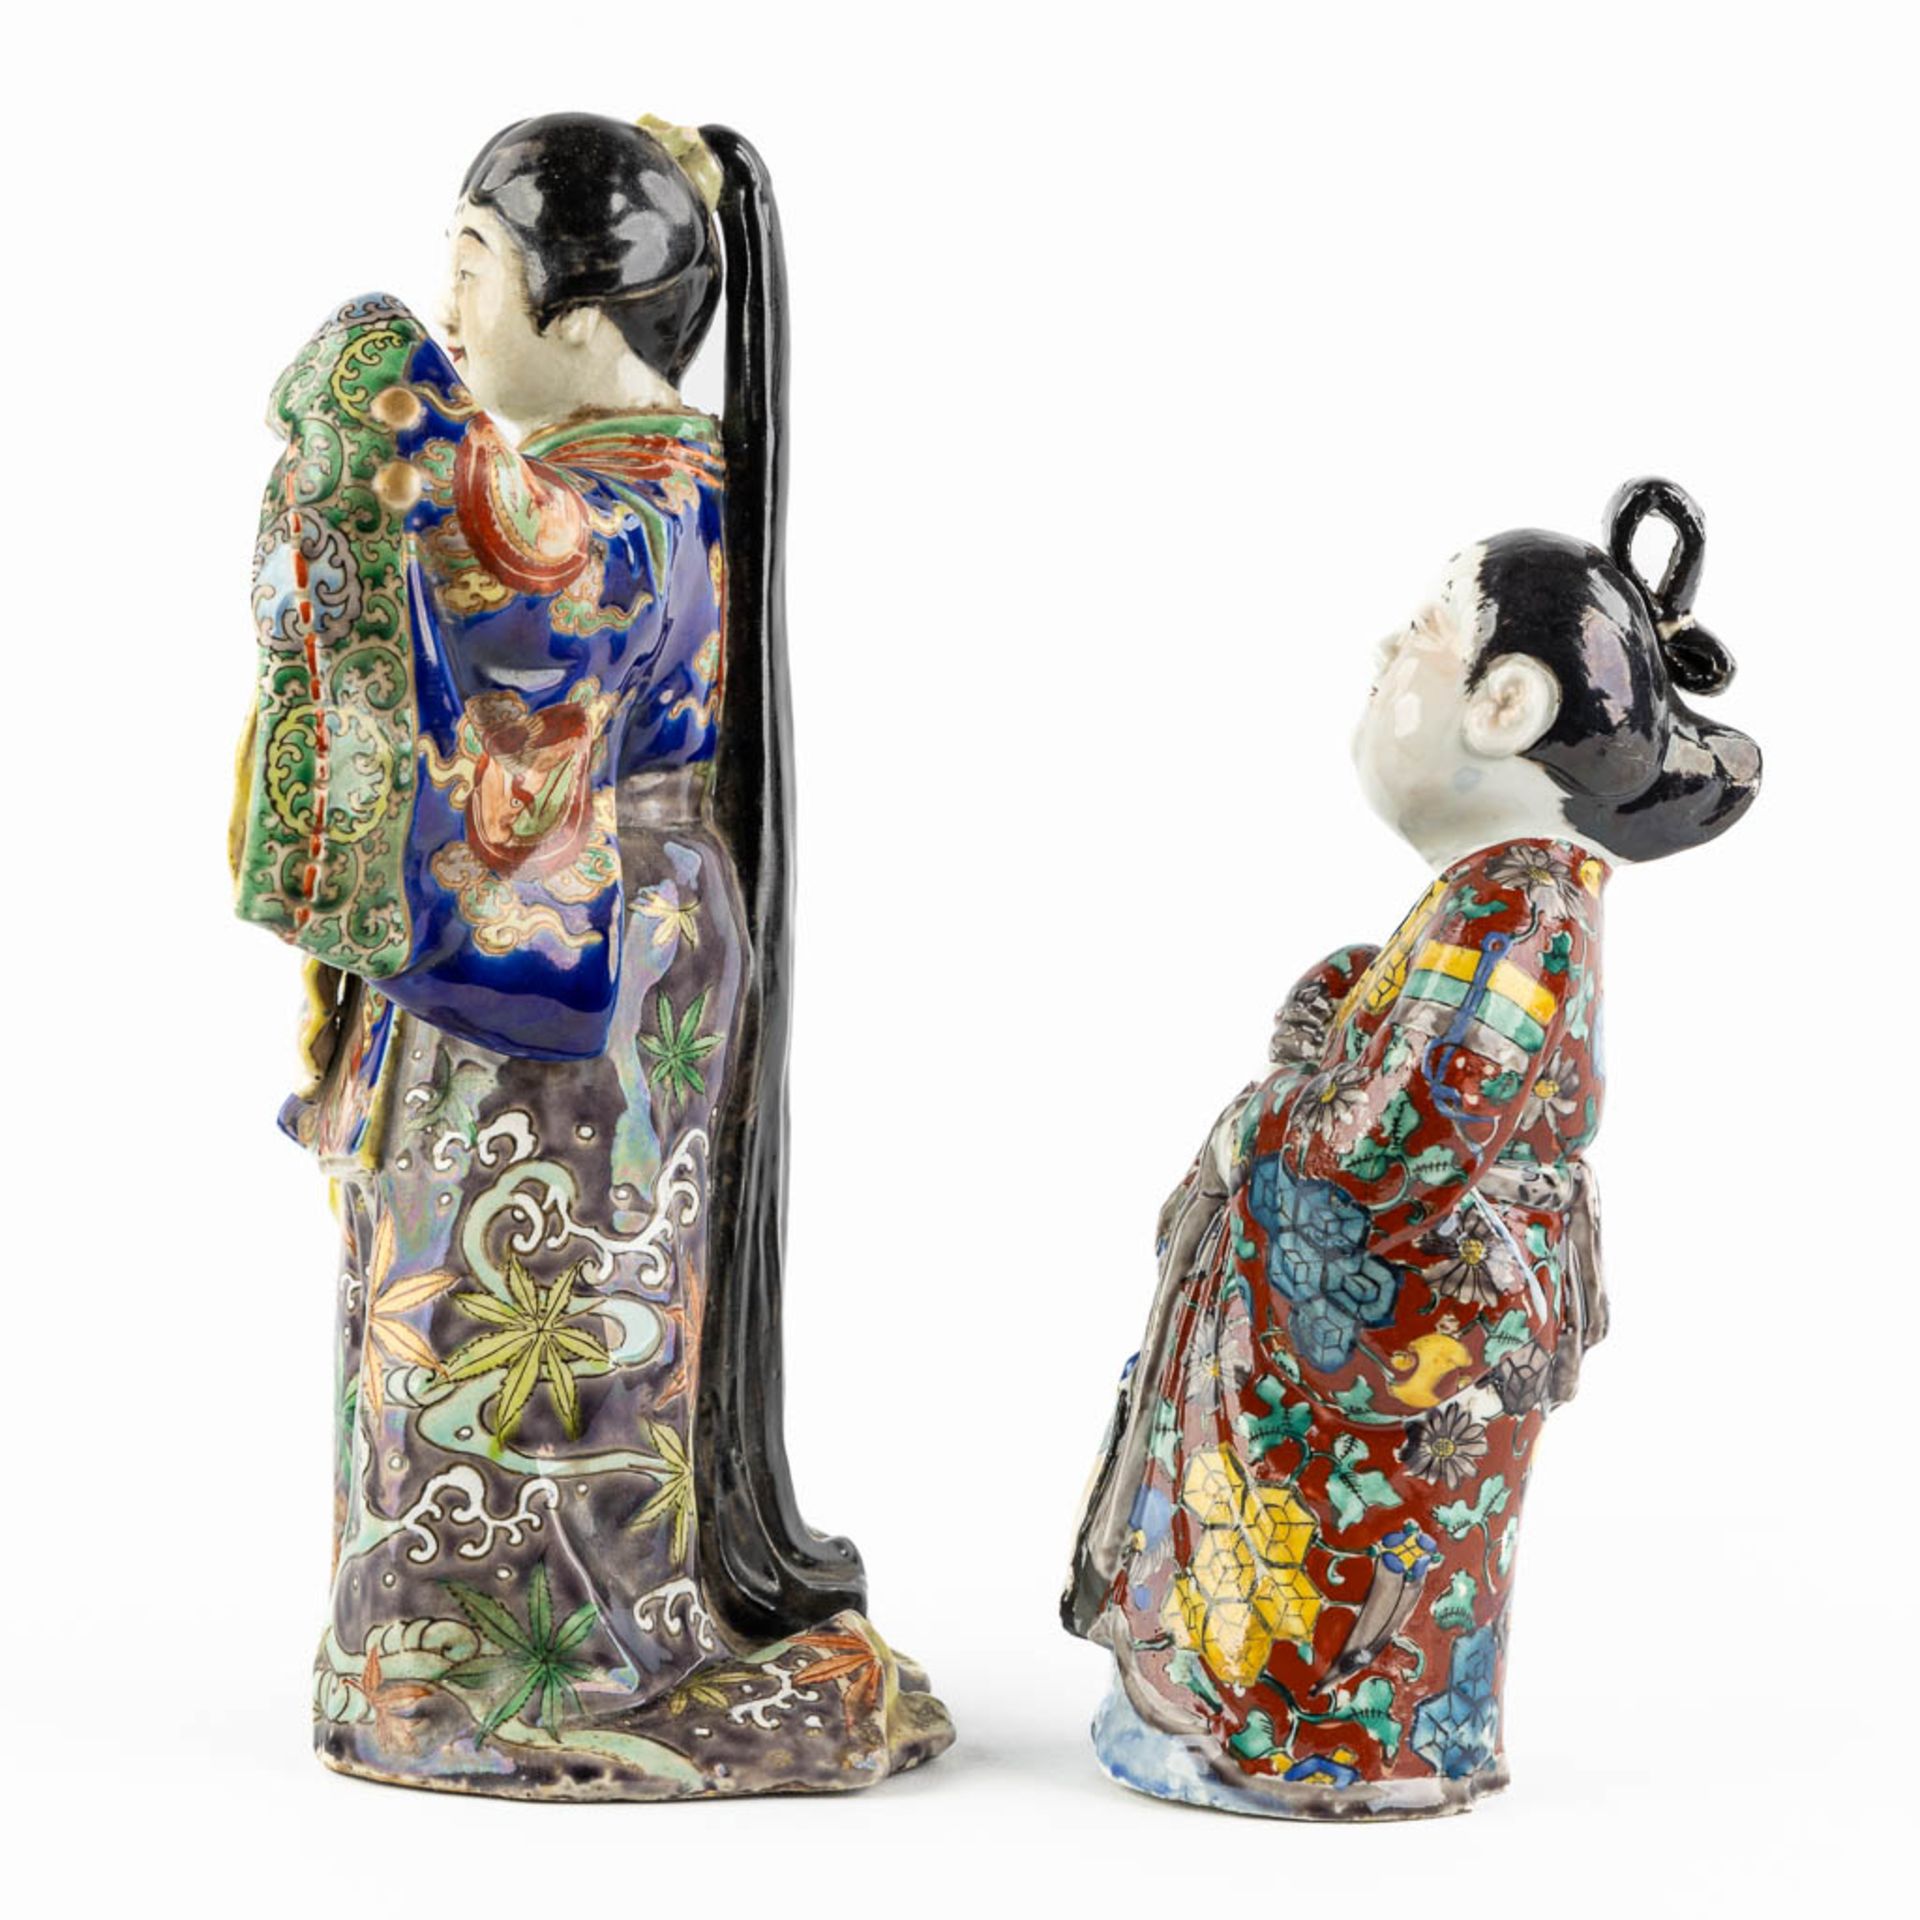 Two Japanese figurines, glazed stoneware. 19th/20th C. (L:14 x W:17 x H:32 cm) - Image 6 of 12